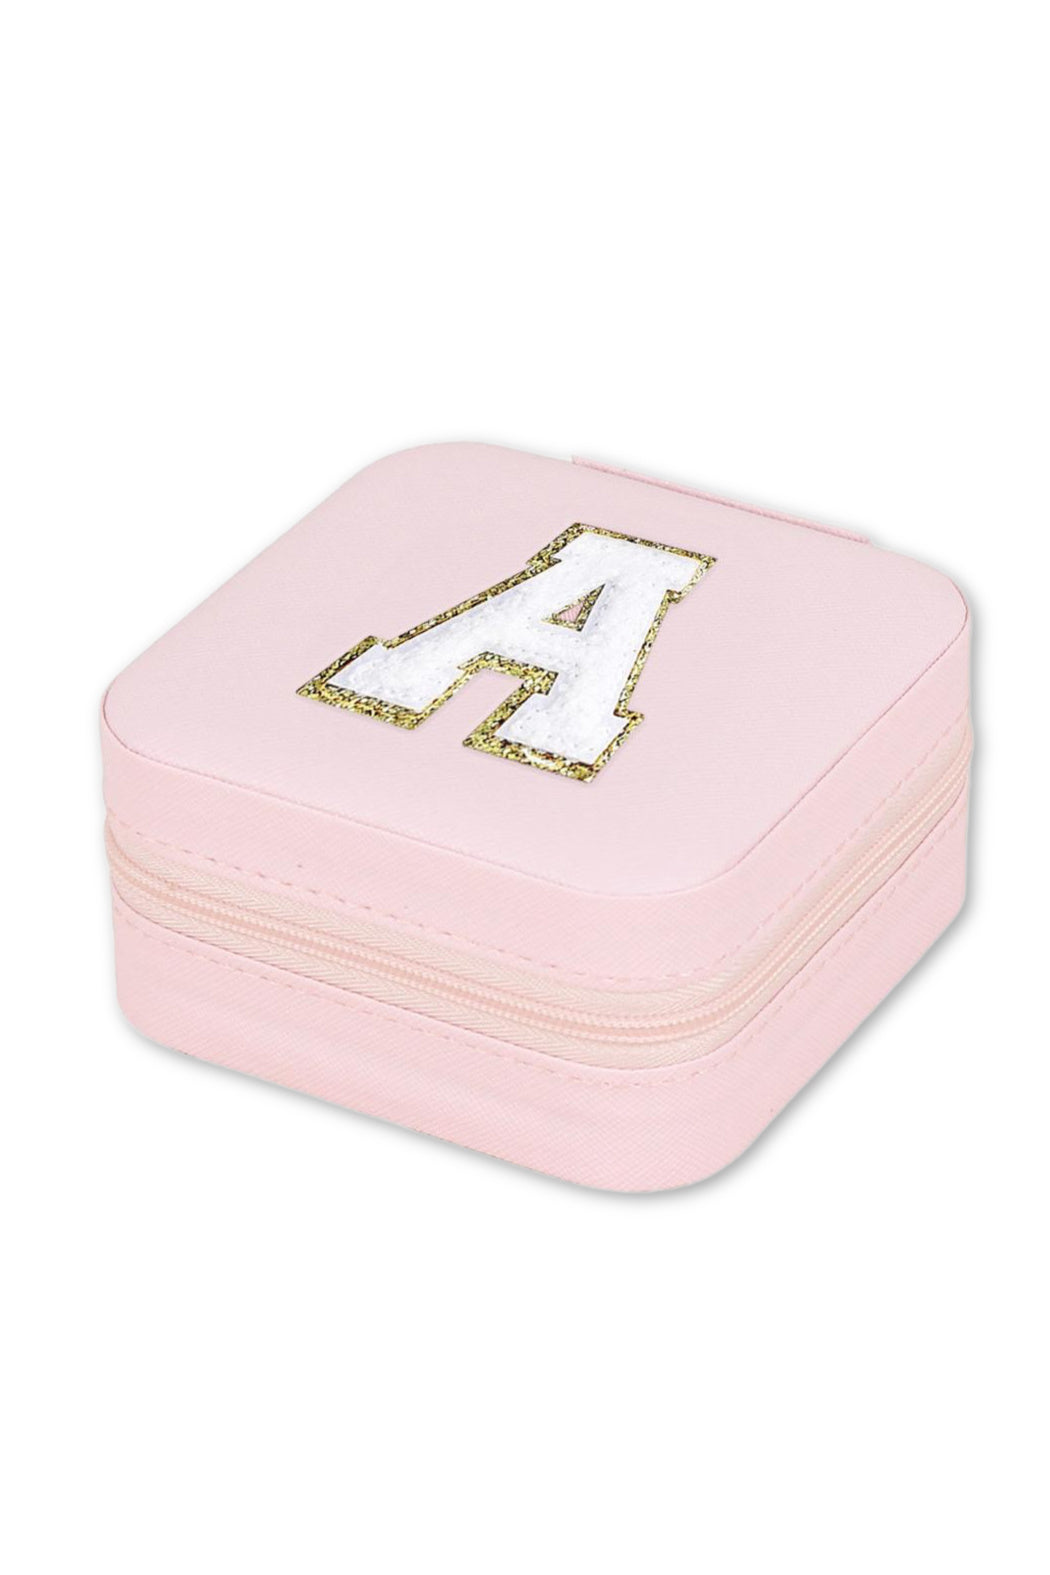 Chenille Lettered Little Pink Jewelry Box by Embellish Your Life